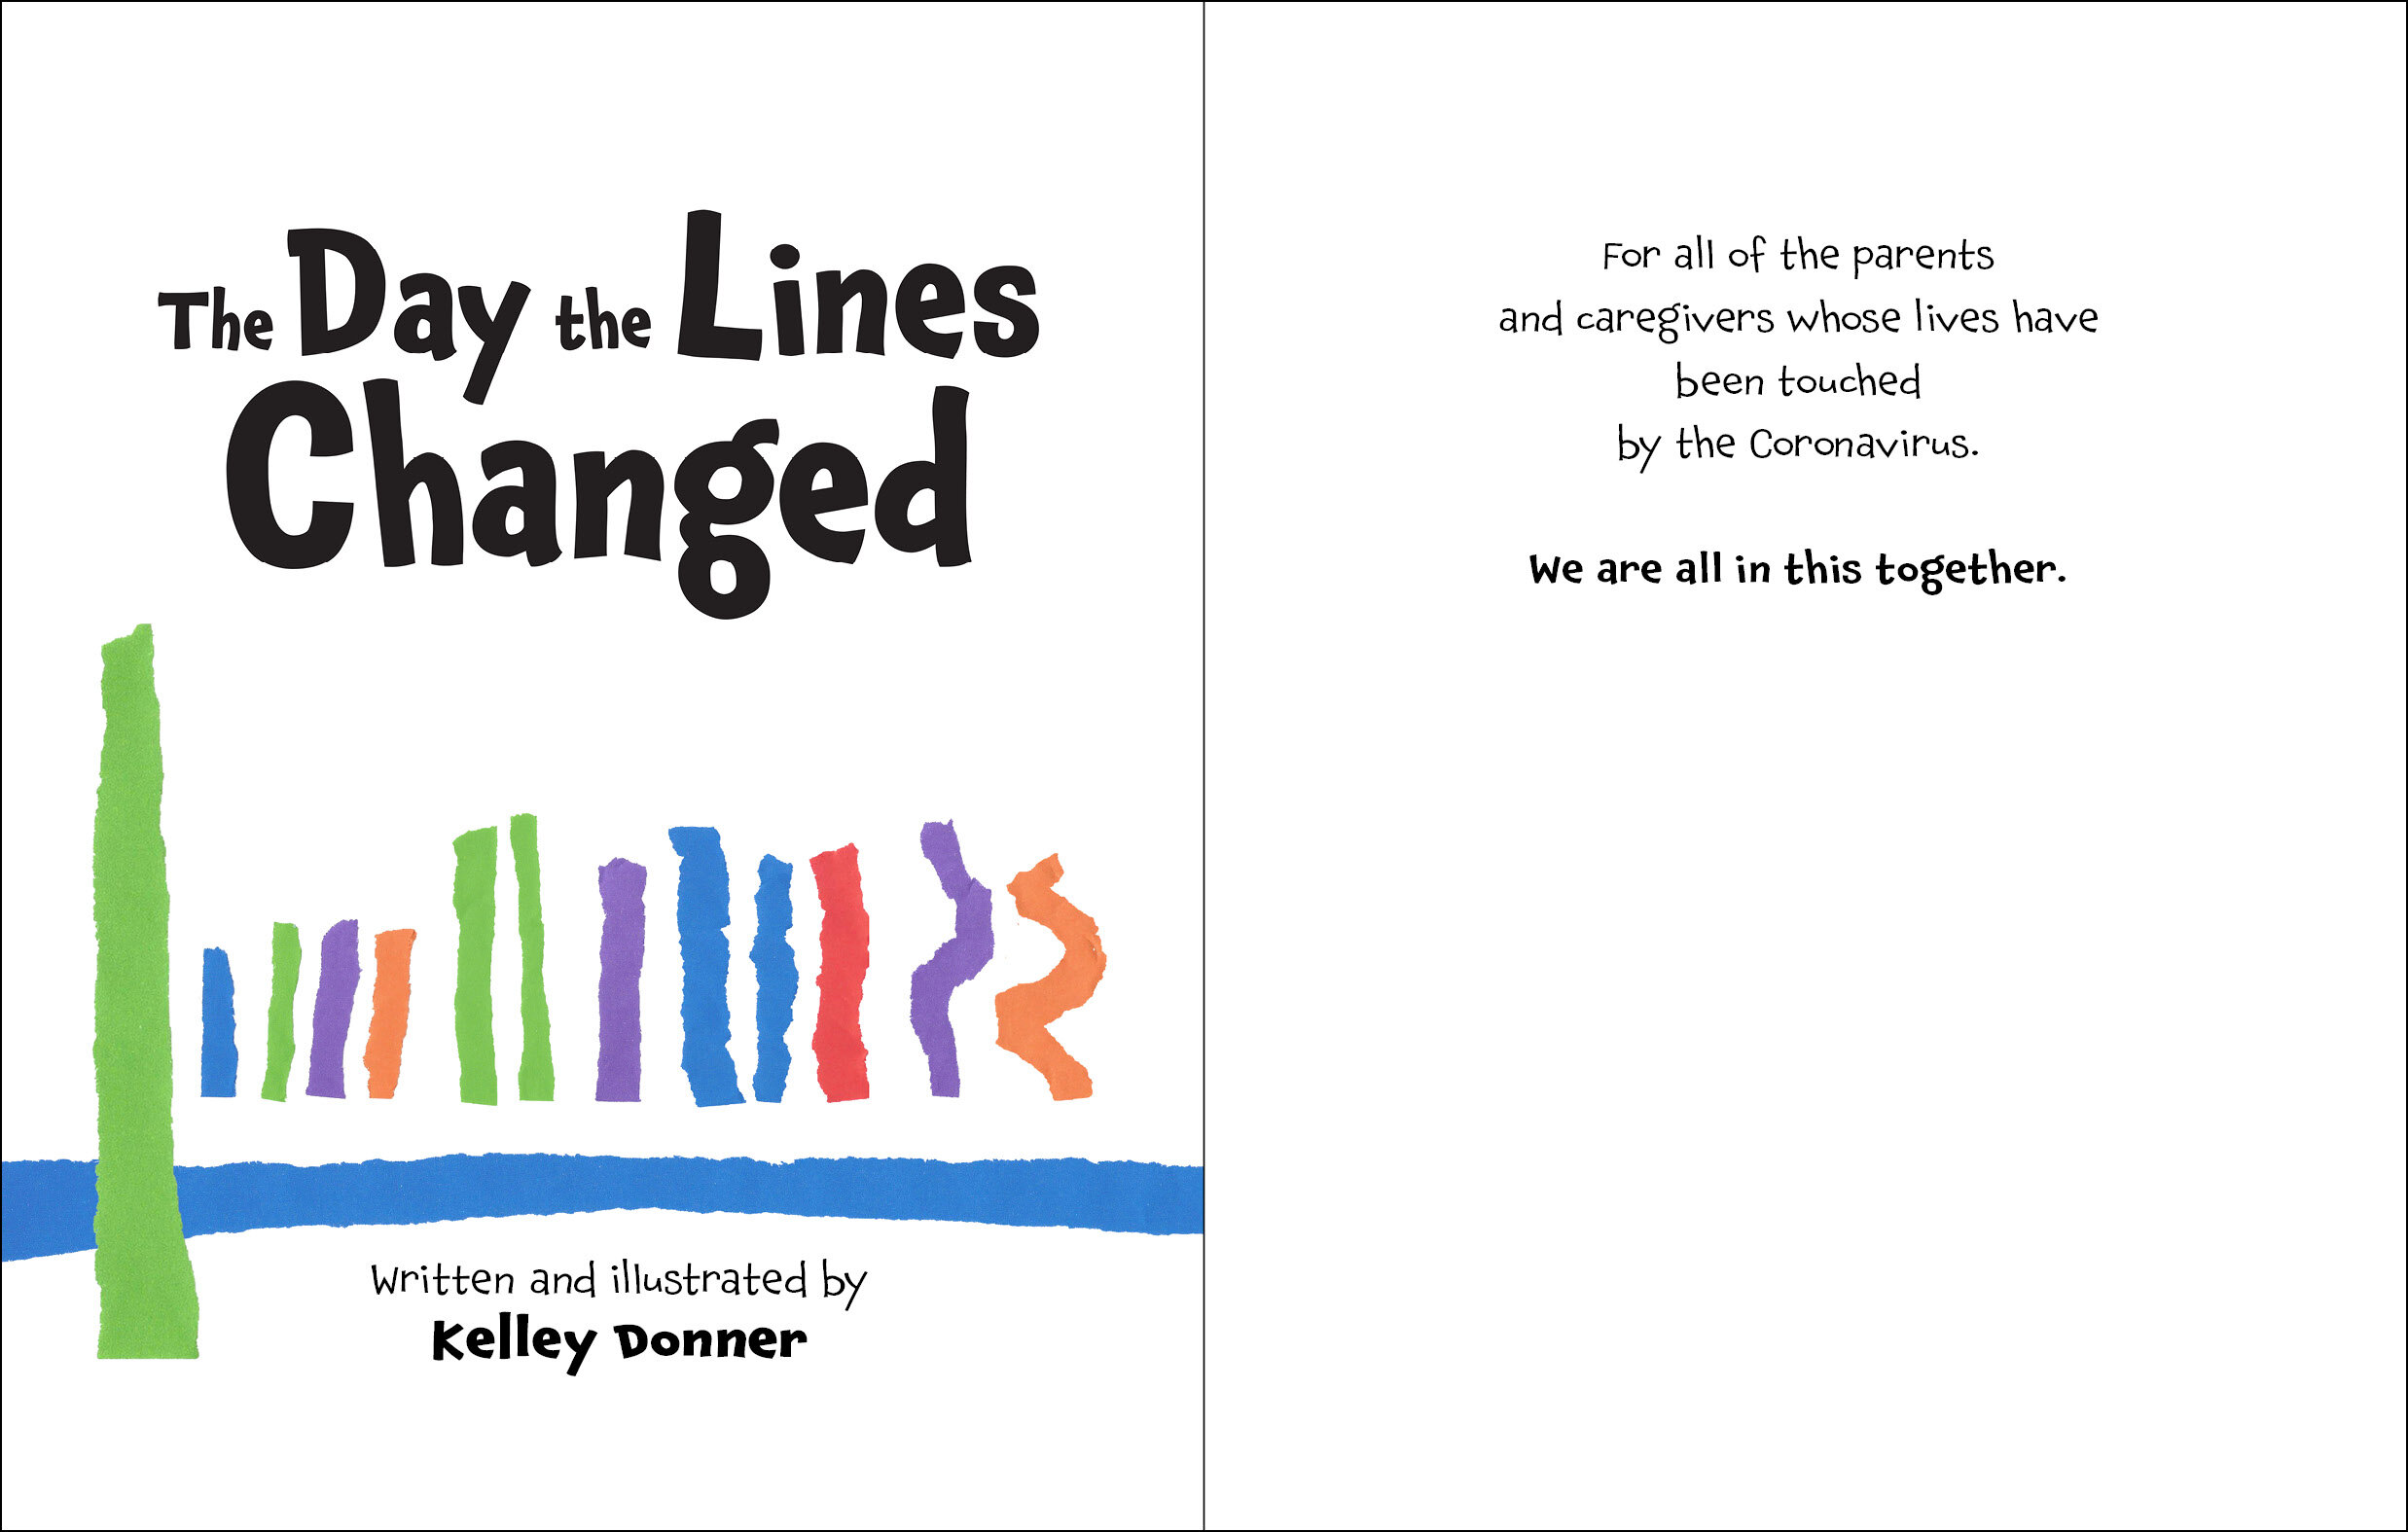 The Day the Lines Changed - Slideshow